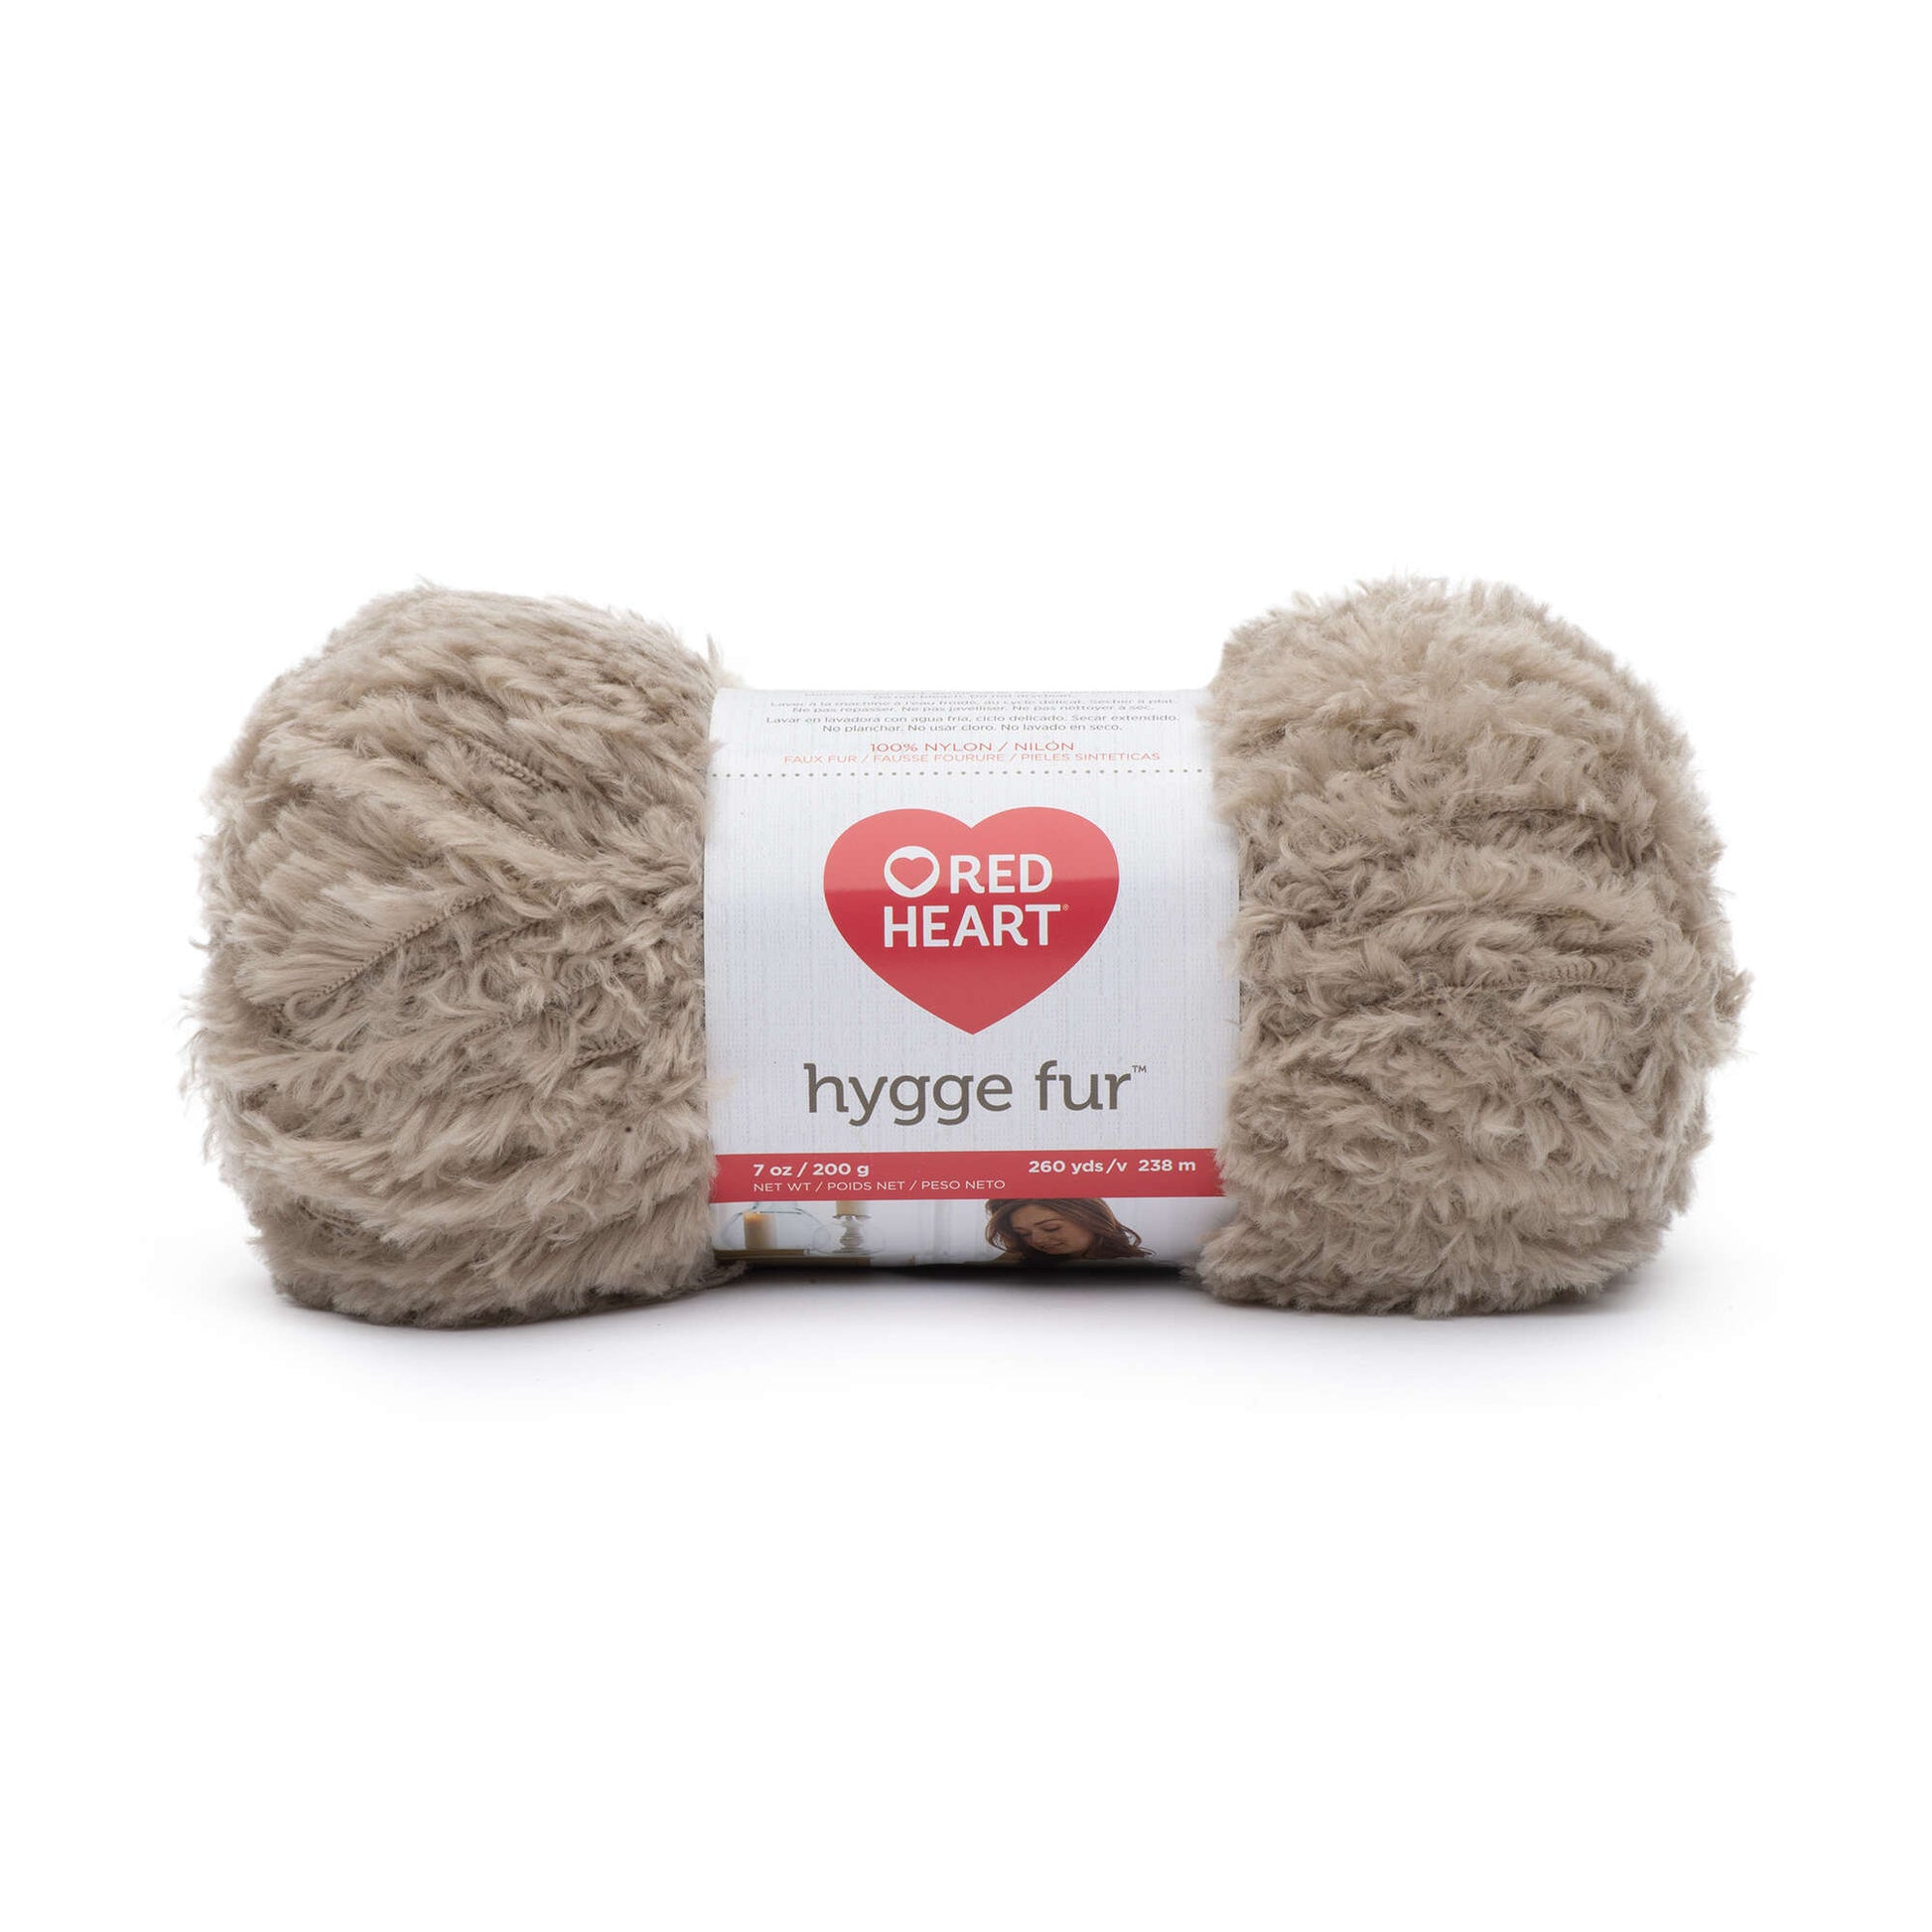 Red Heart Hygge Fur Yarn - Discontinued shades Soft Taupe